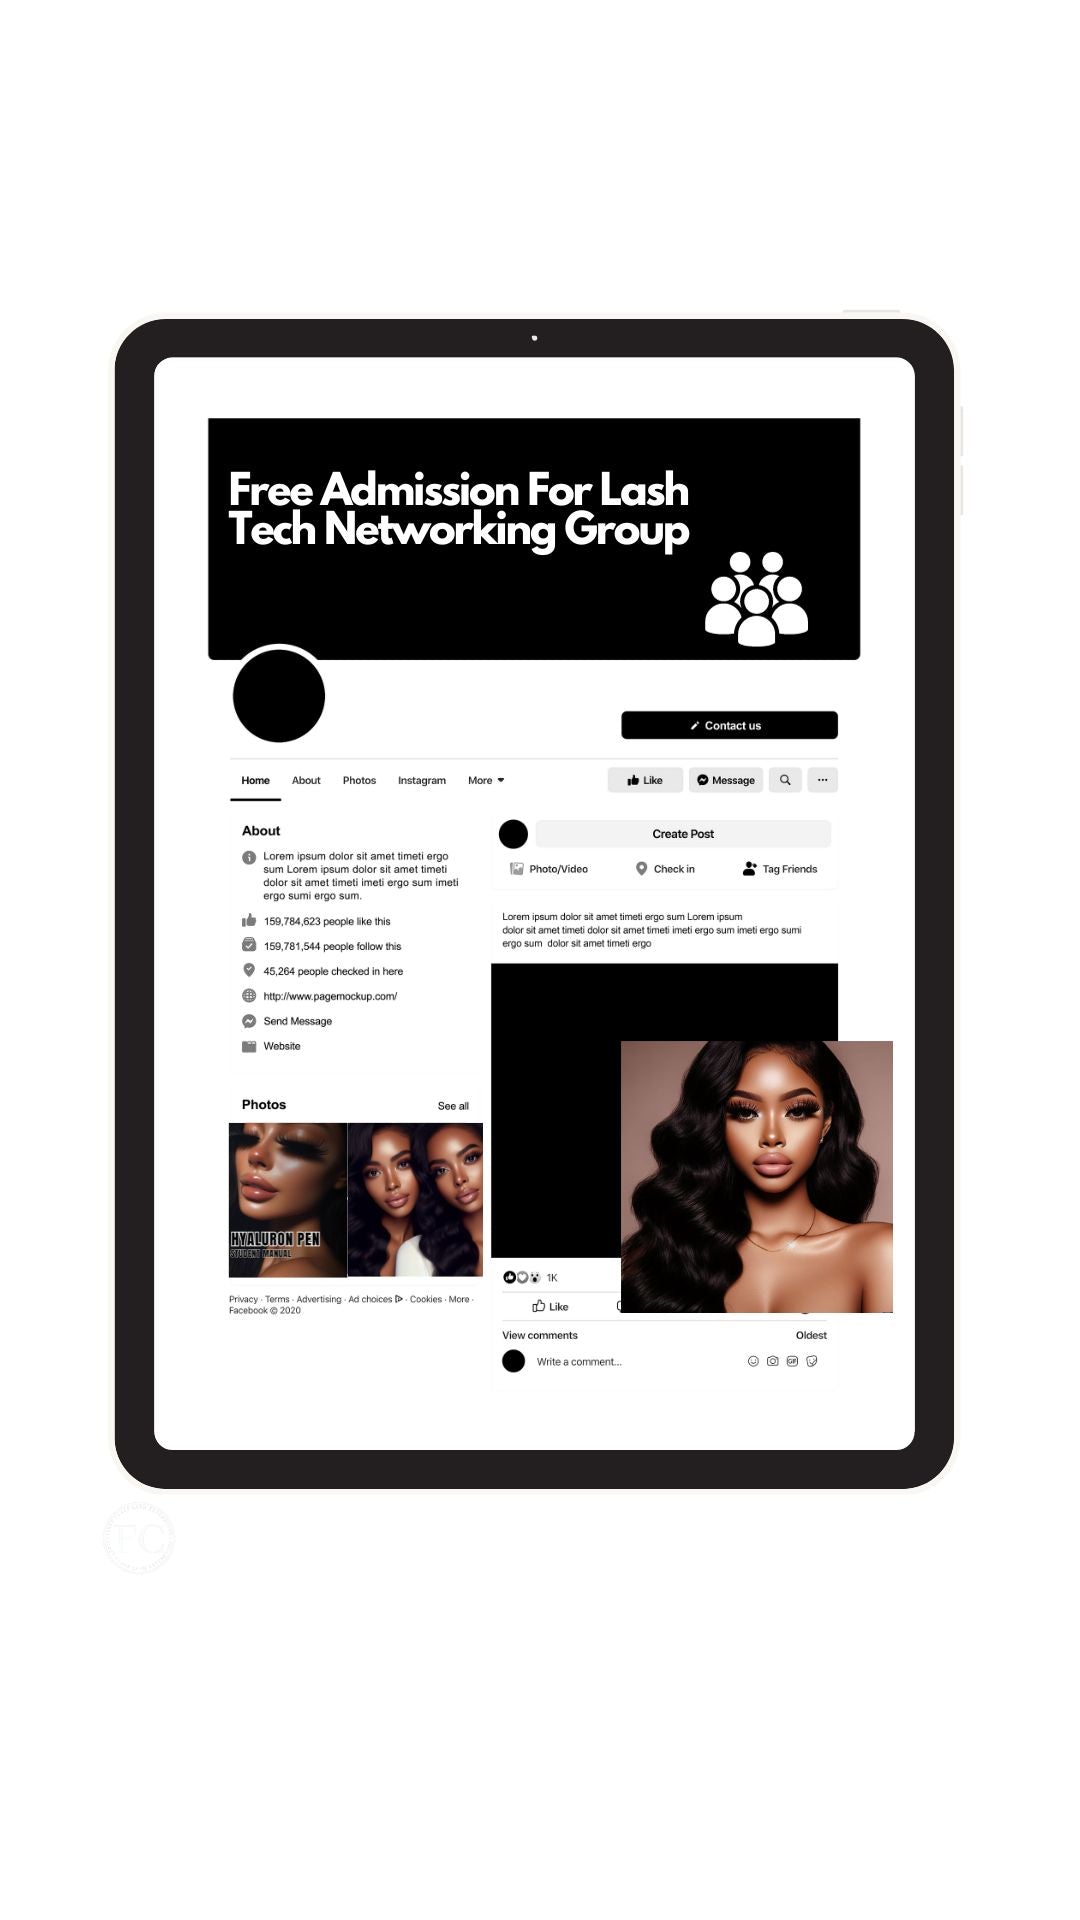 Free Admission For Lash Tech Networking Group